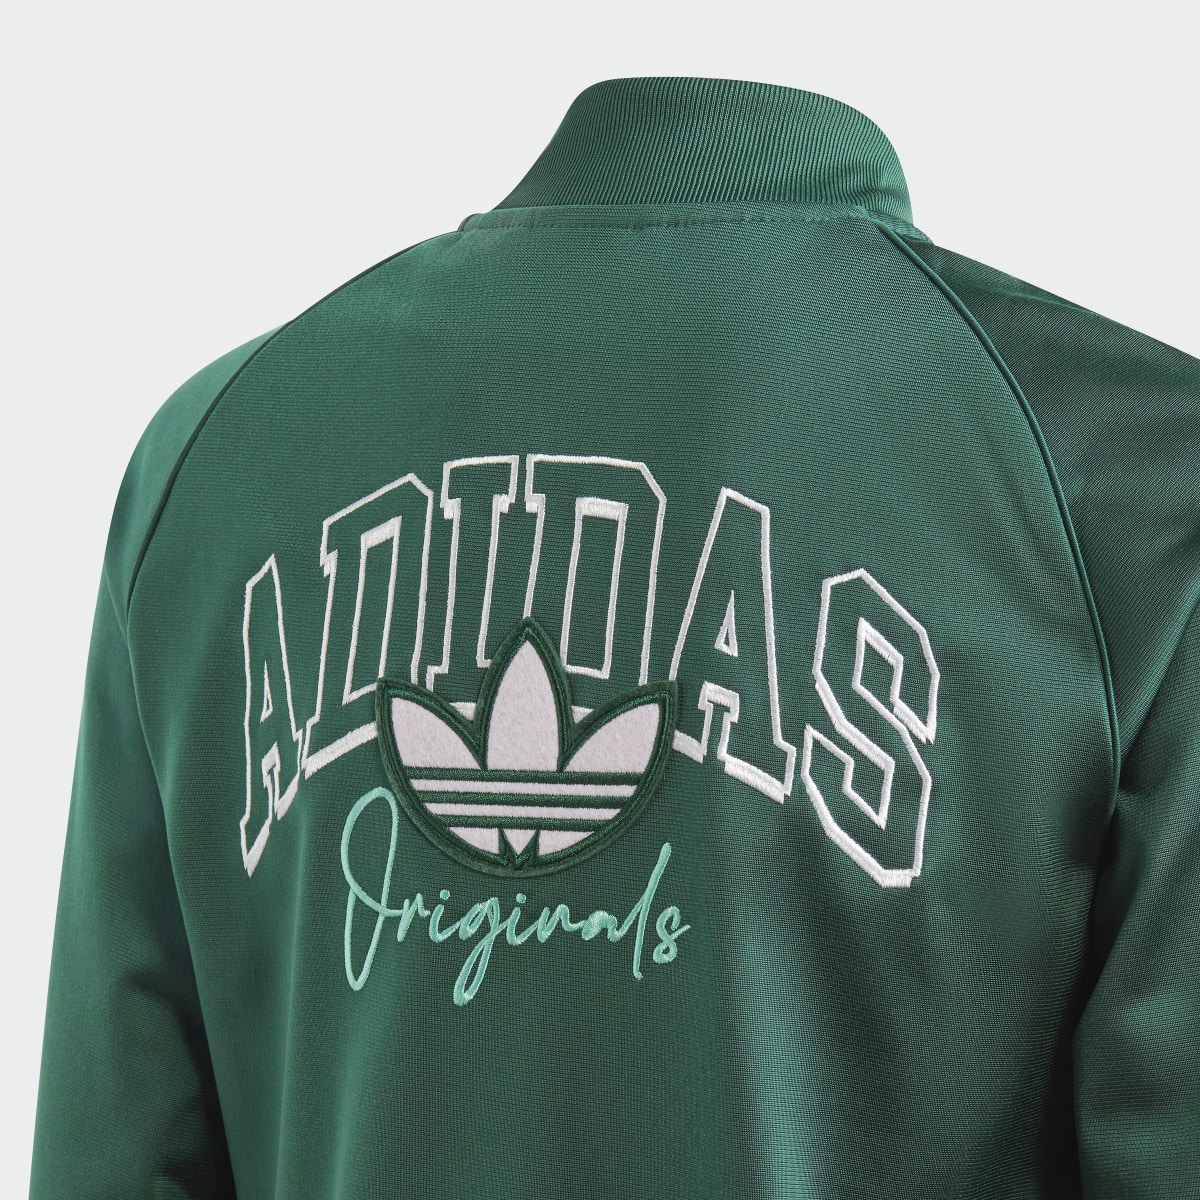 Adidas Track top Collegiate Graphic Pack SST. 5